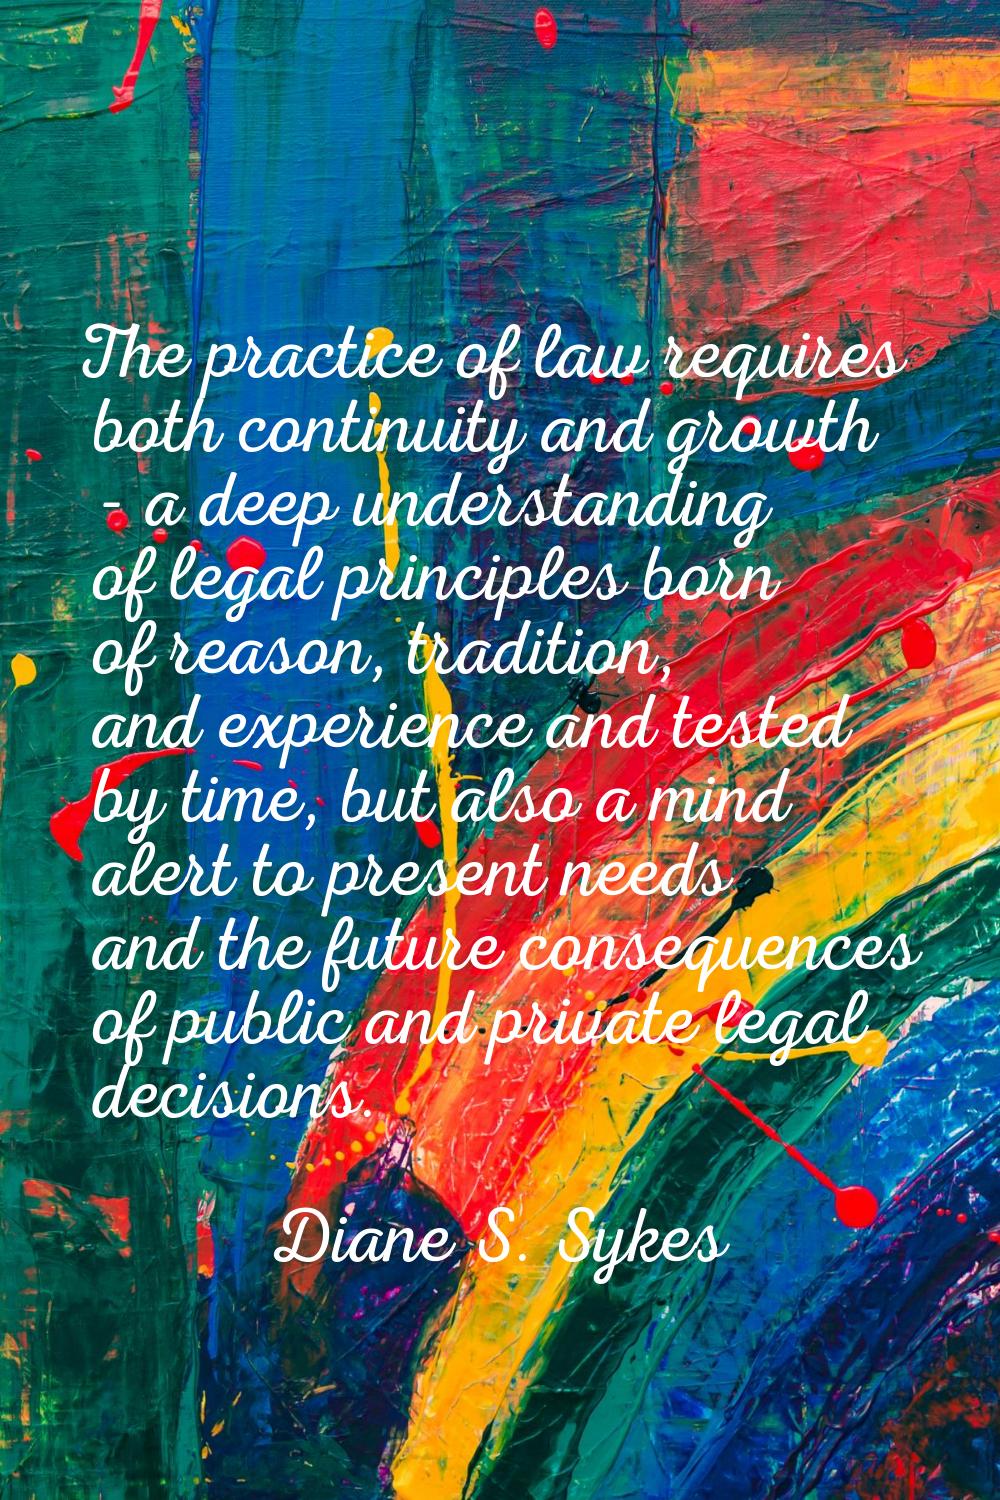 The practice of law requires both continuity and growth - a deep understanding of legal principles 